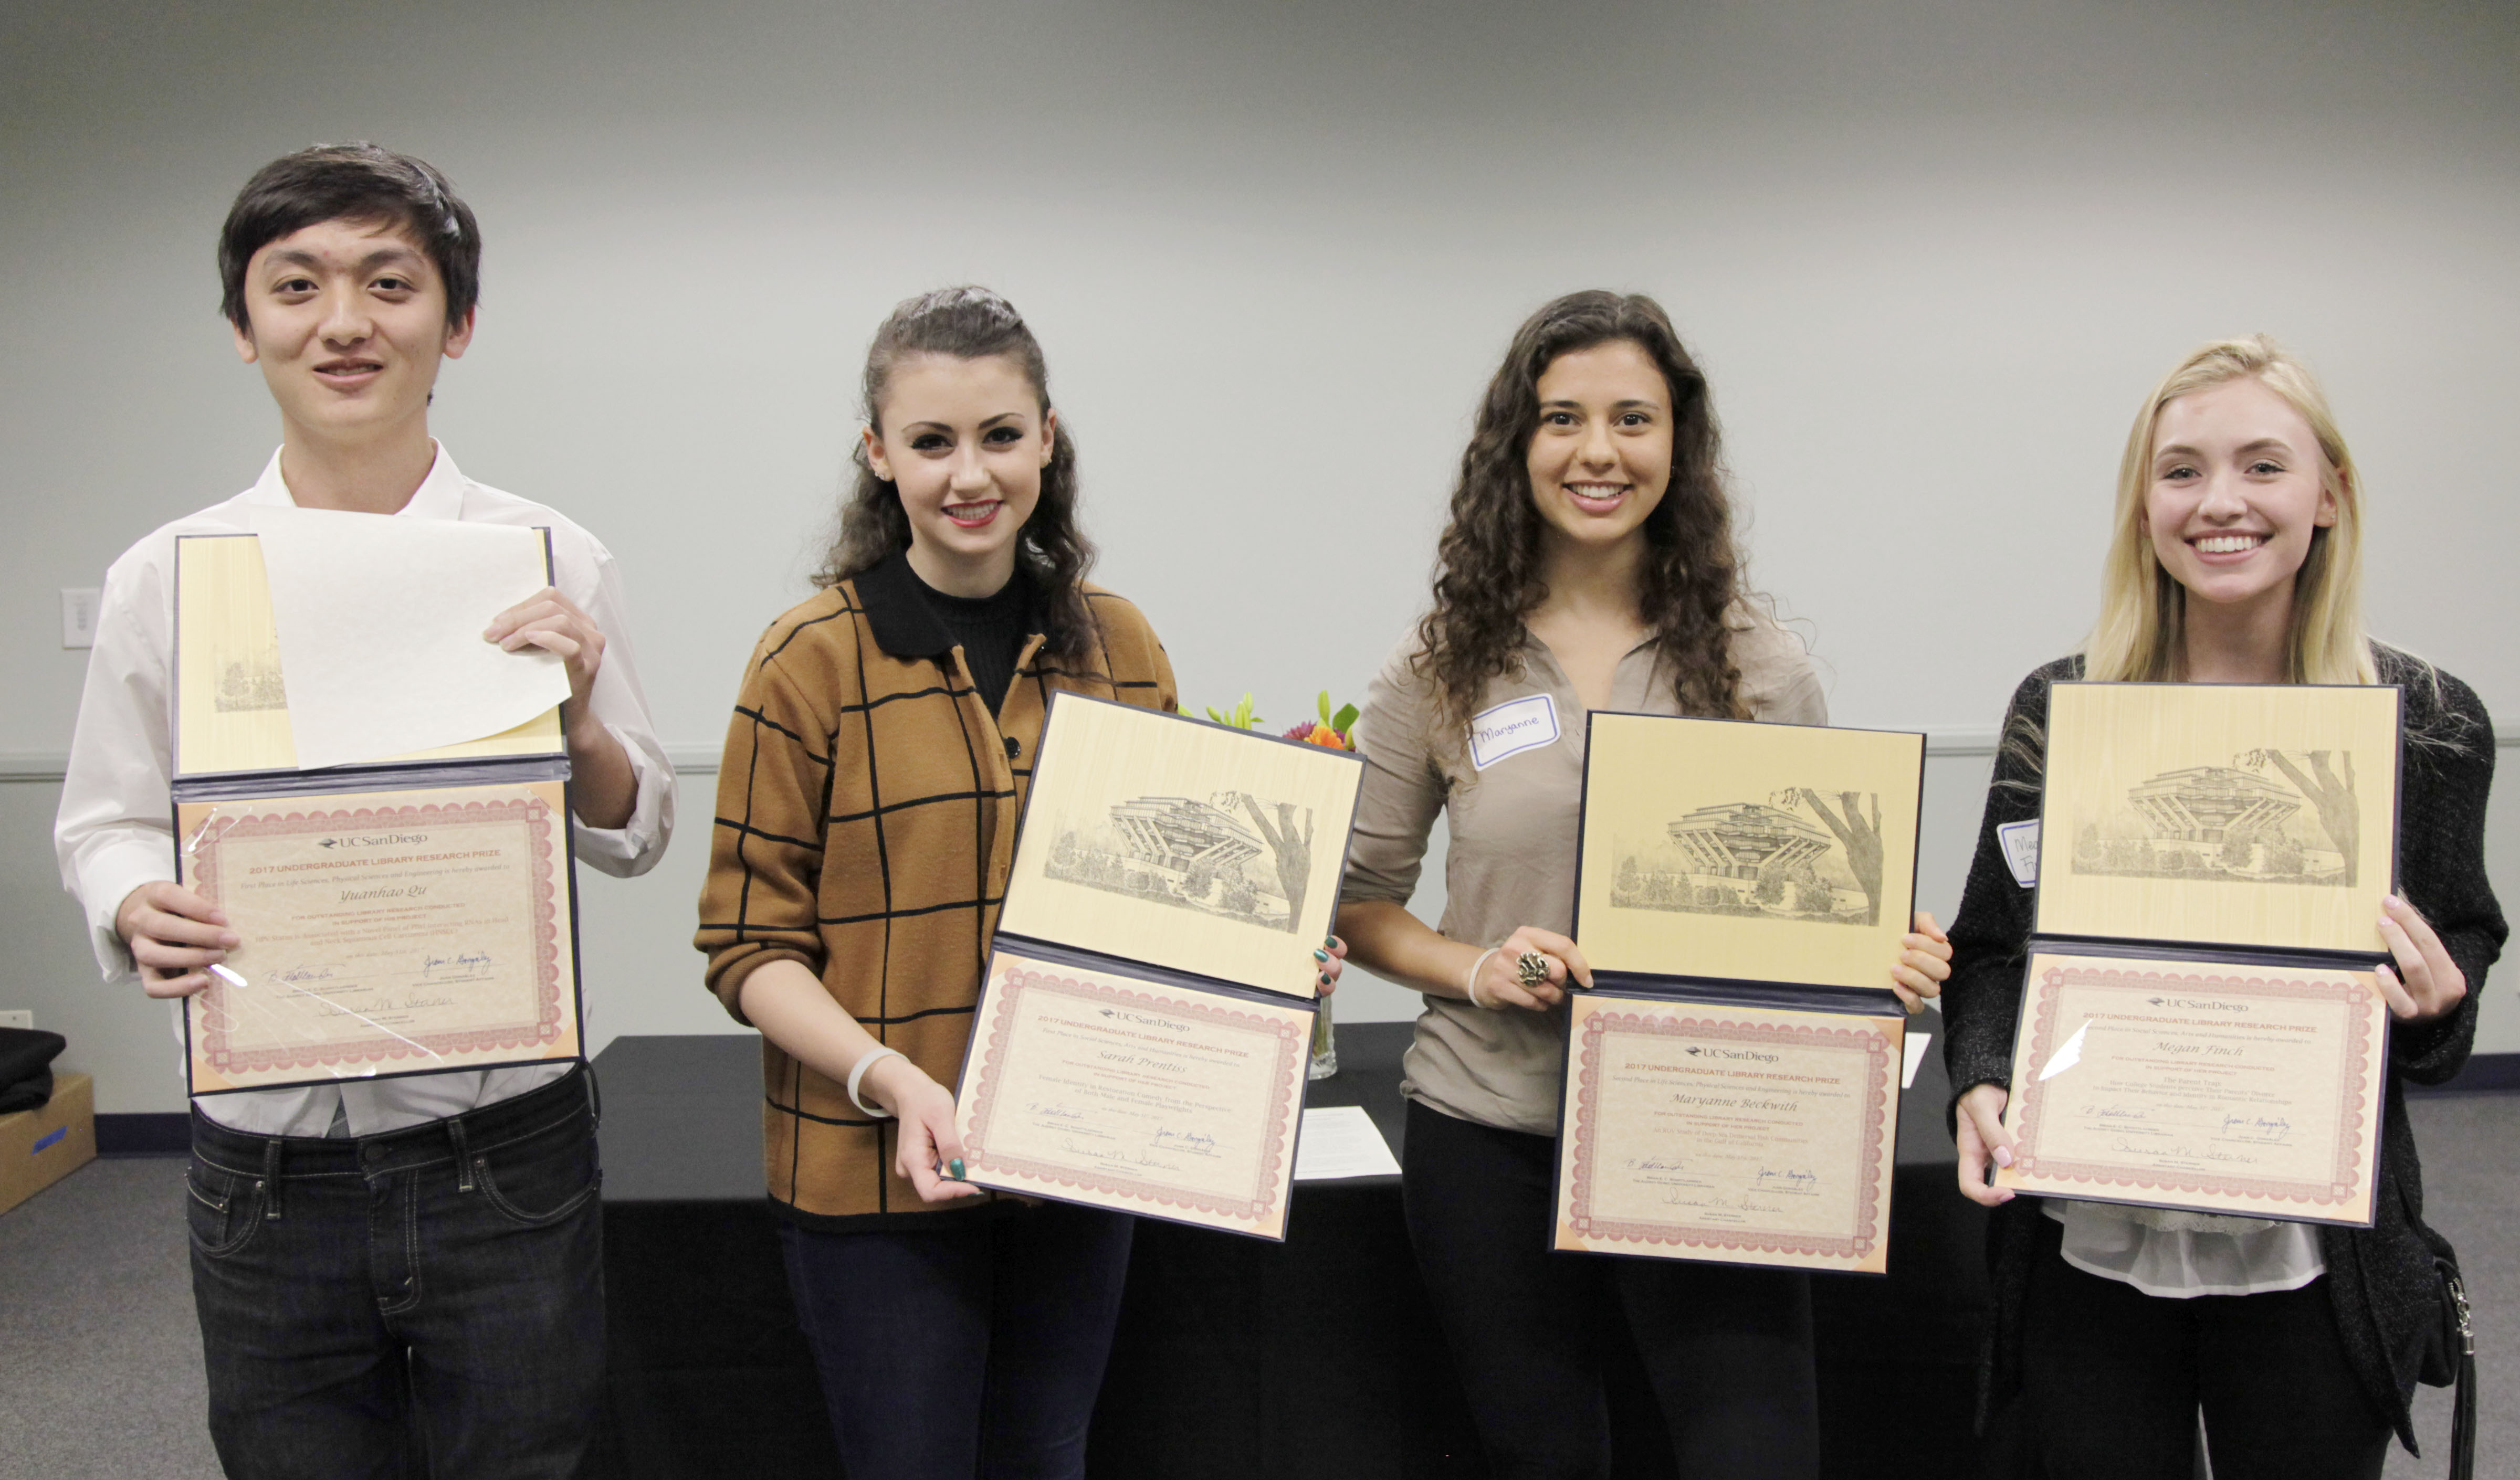 Congratulations to the 2017 Undergraduate Library Research Prize Winners!